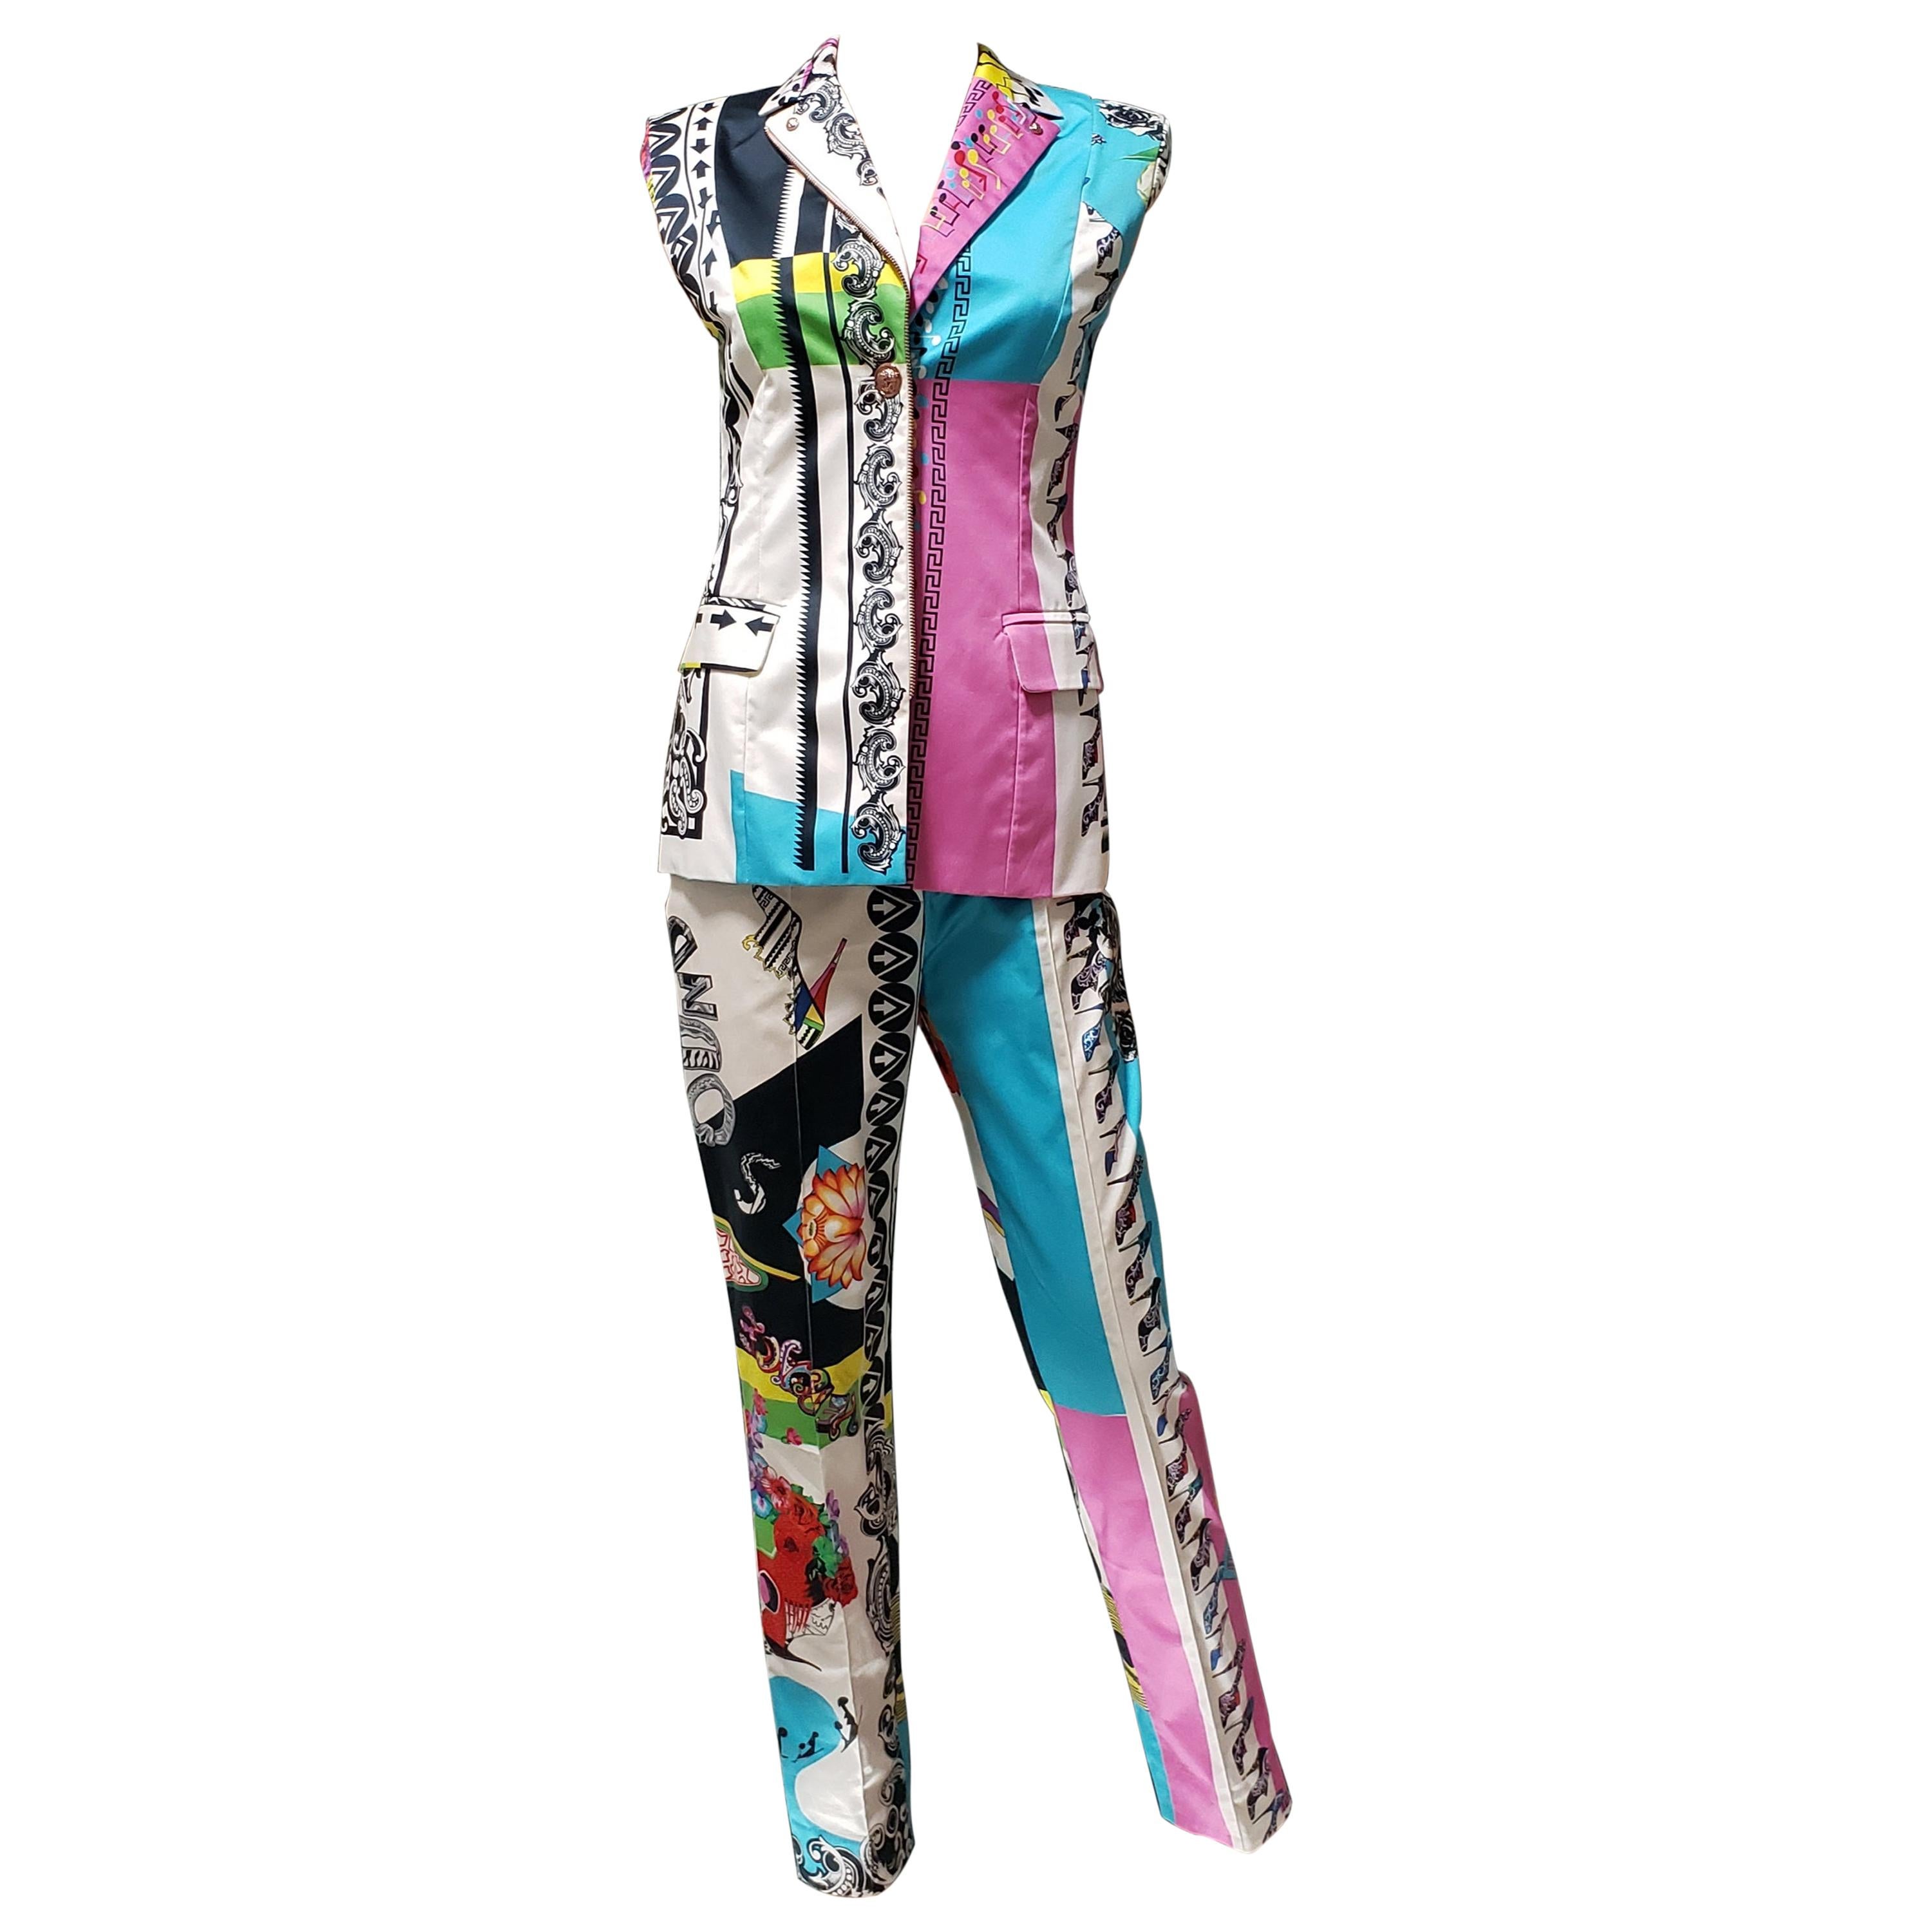 Resort 2013 Look # 4 NEW VERSACE ICONIC PRINT PANT SUIT 38 - 2  For Sale